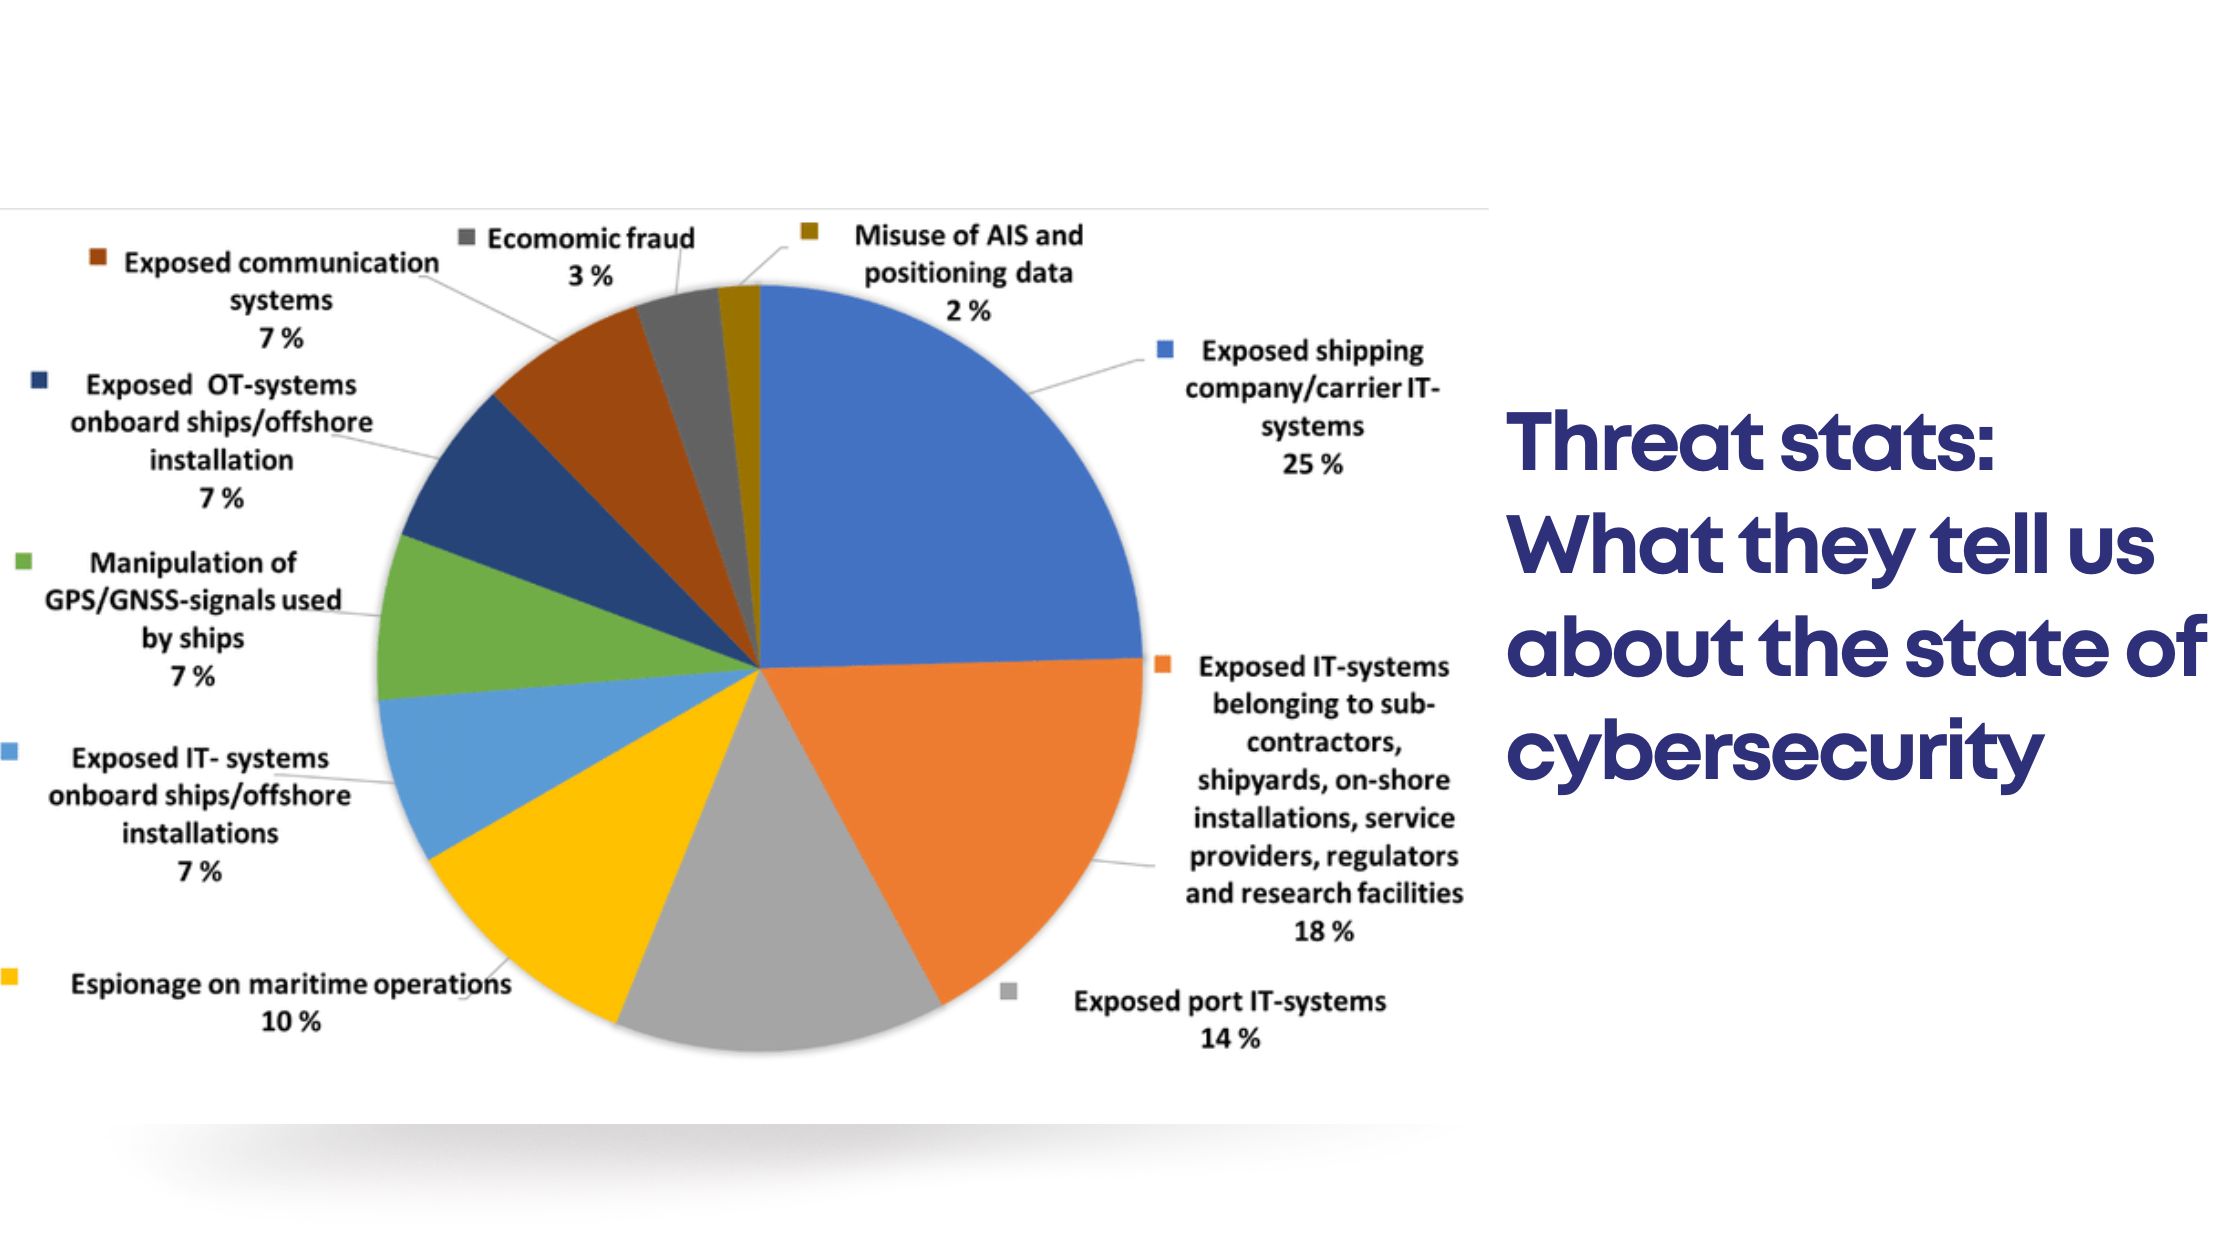 Threat stats: What they tell us about the state of cybersecurity